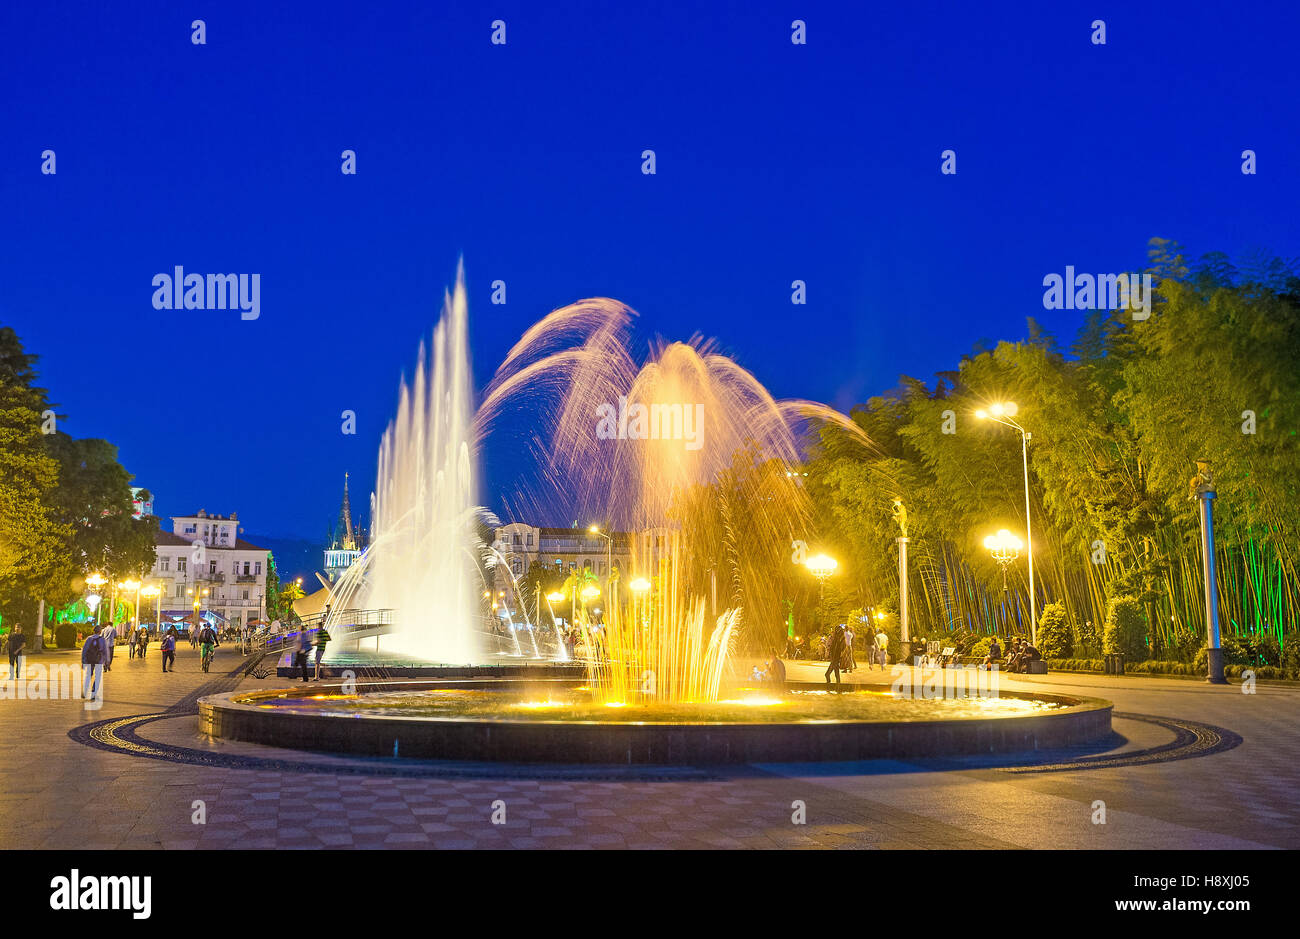 The dancing fountains in Primorsky (Seaside) park attract the tourists from all city, Batumi, Georgia. Stock Photo